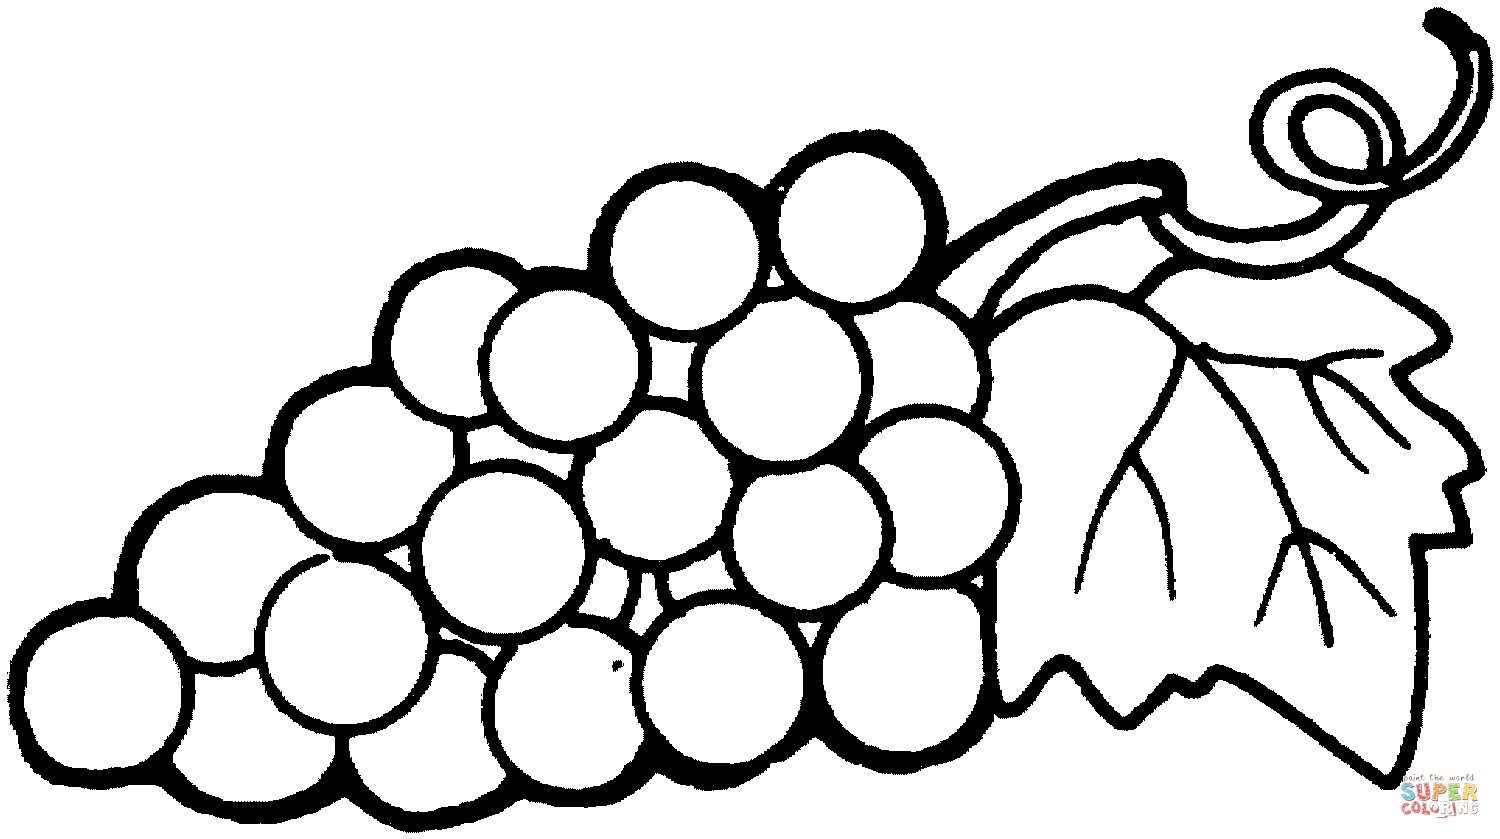 Grape 15 coloring page | Free Printable Coloring Pages